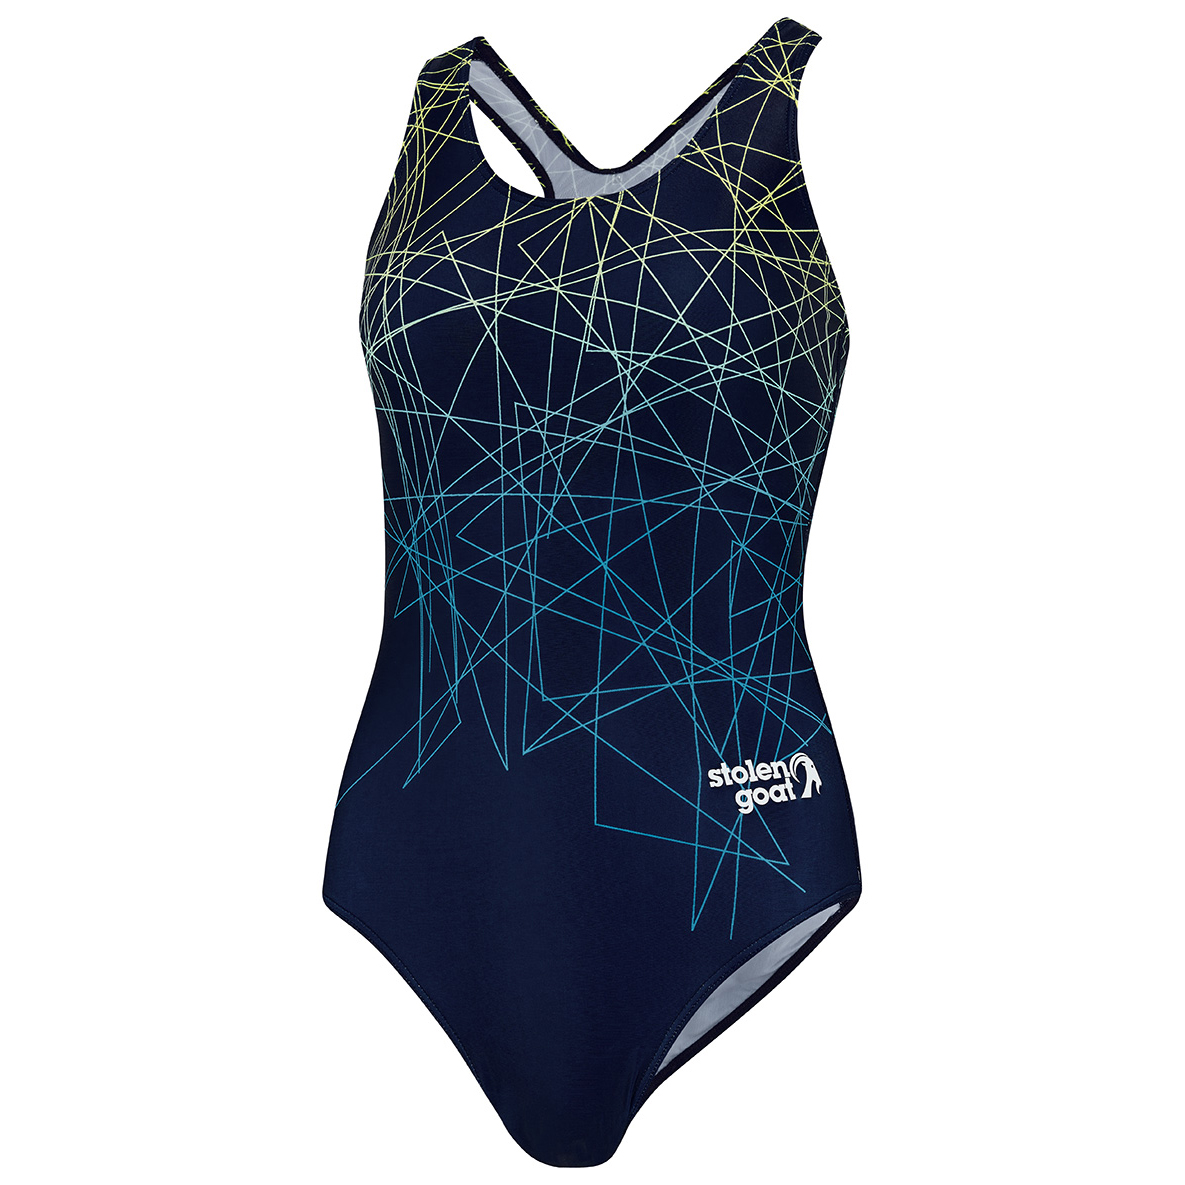 Stolen Goat Vortex navy women's swim suit with muscle back cut and green and blue linear design